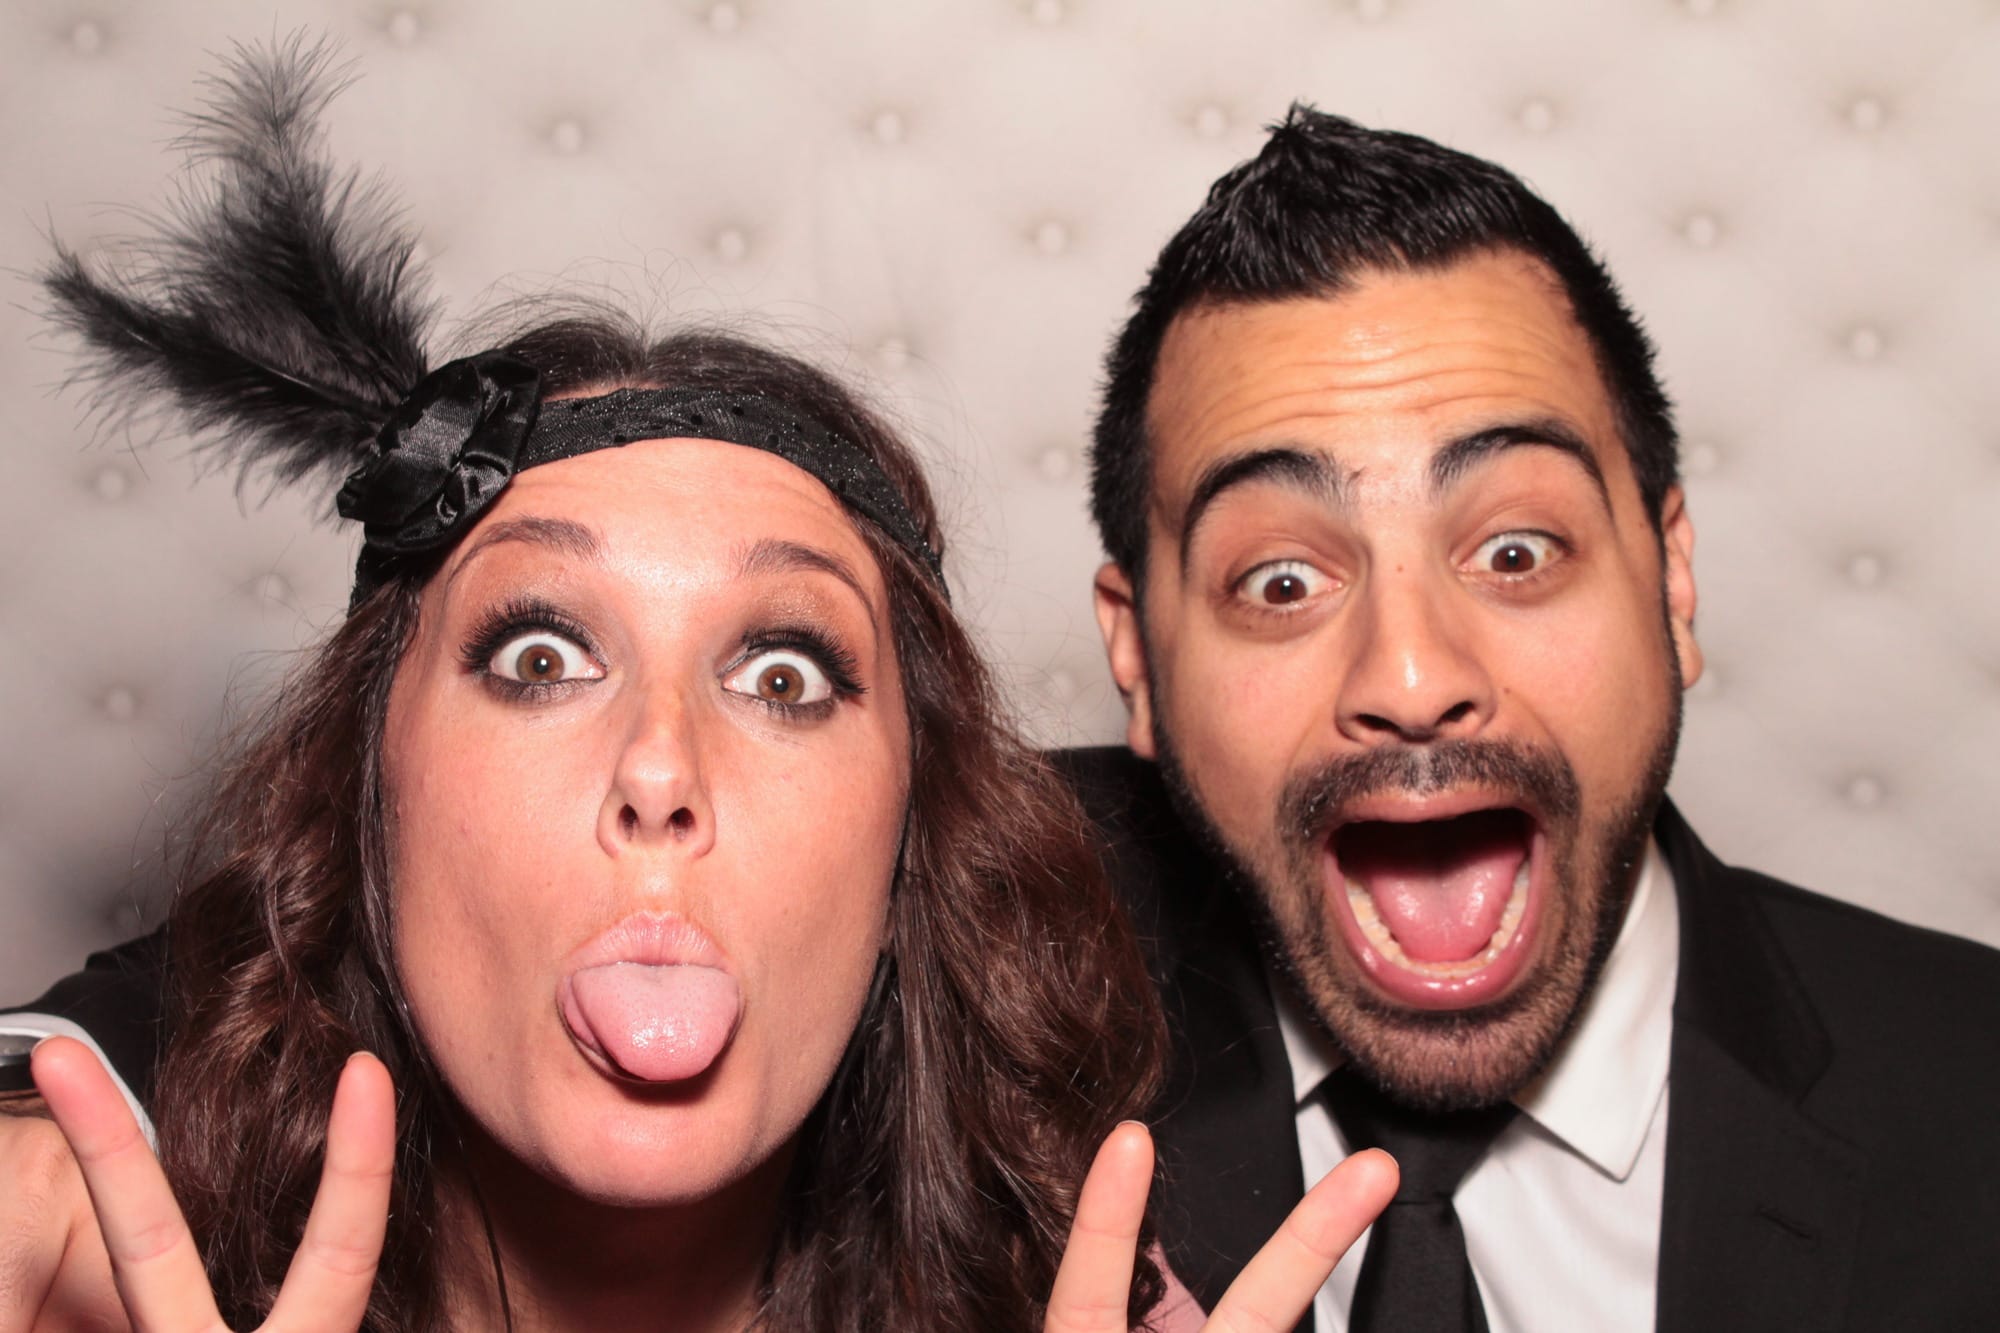 Photo Booth-Rental-Austin-Wedding-Props-No. 1-Outstanding-Happy-Studio-Quality-High Resolution